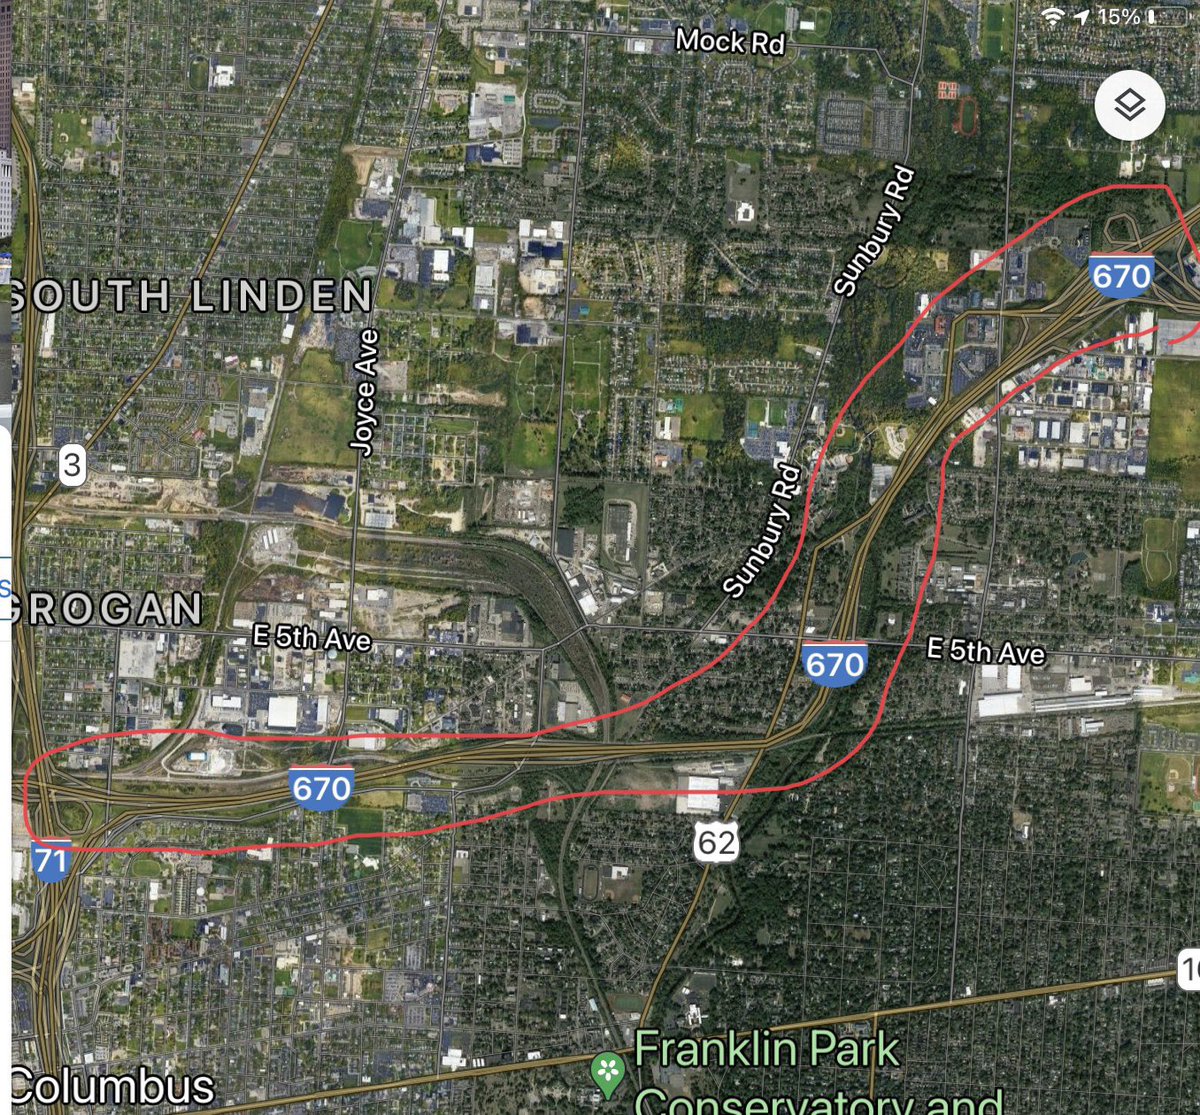 For Central Ohio folks, consider the relatively recent history of the I670 construction from downtown Cbus to the airport. Take a look at the map and the neighborhoods that were sliced through to make it happen despite amazing efforts in the 1970s and 80s by community activists  https://twitter.com/SecretaryPete/status/1381674012670066688